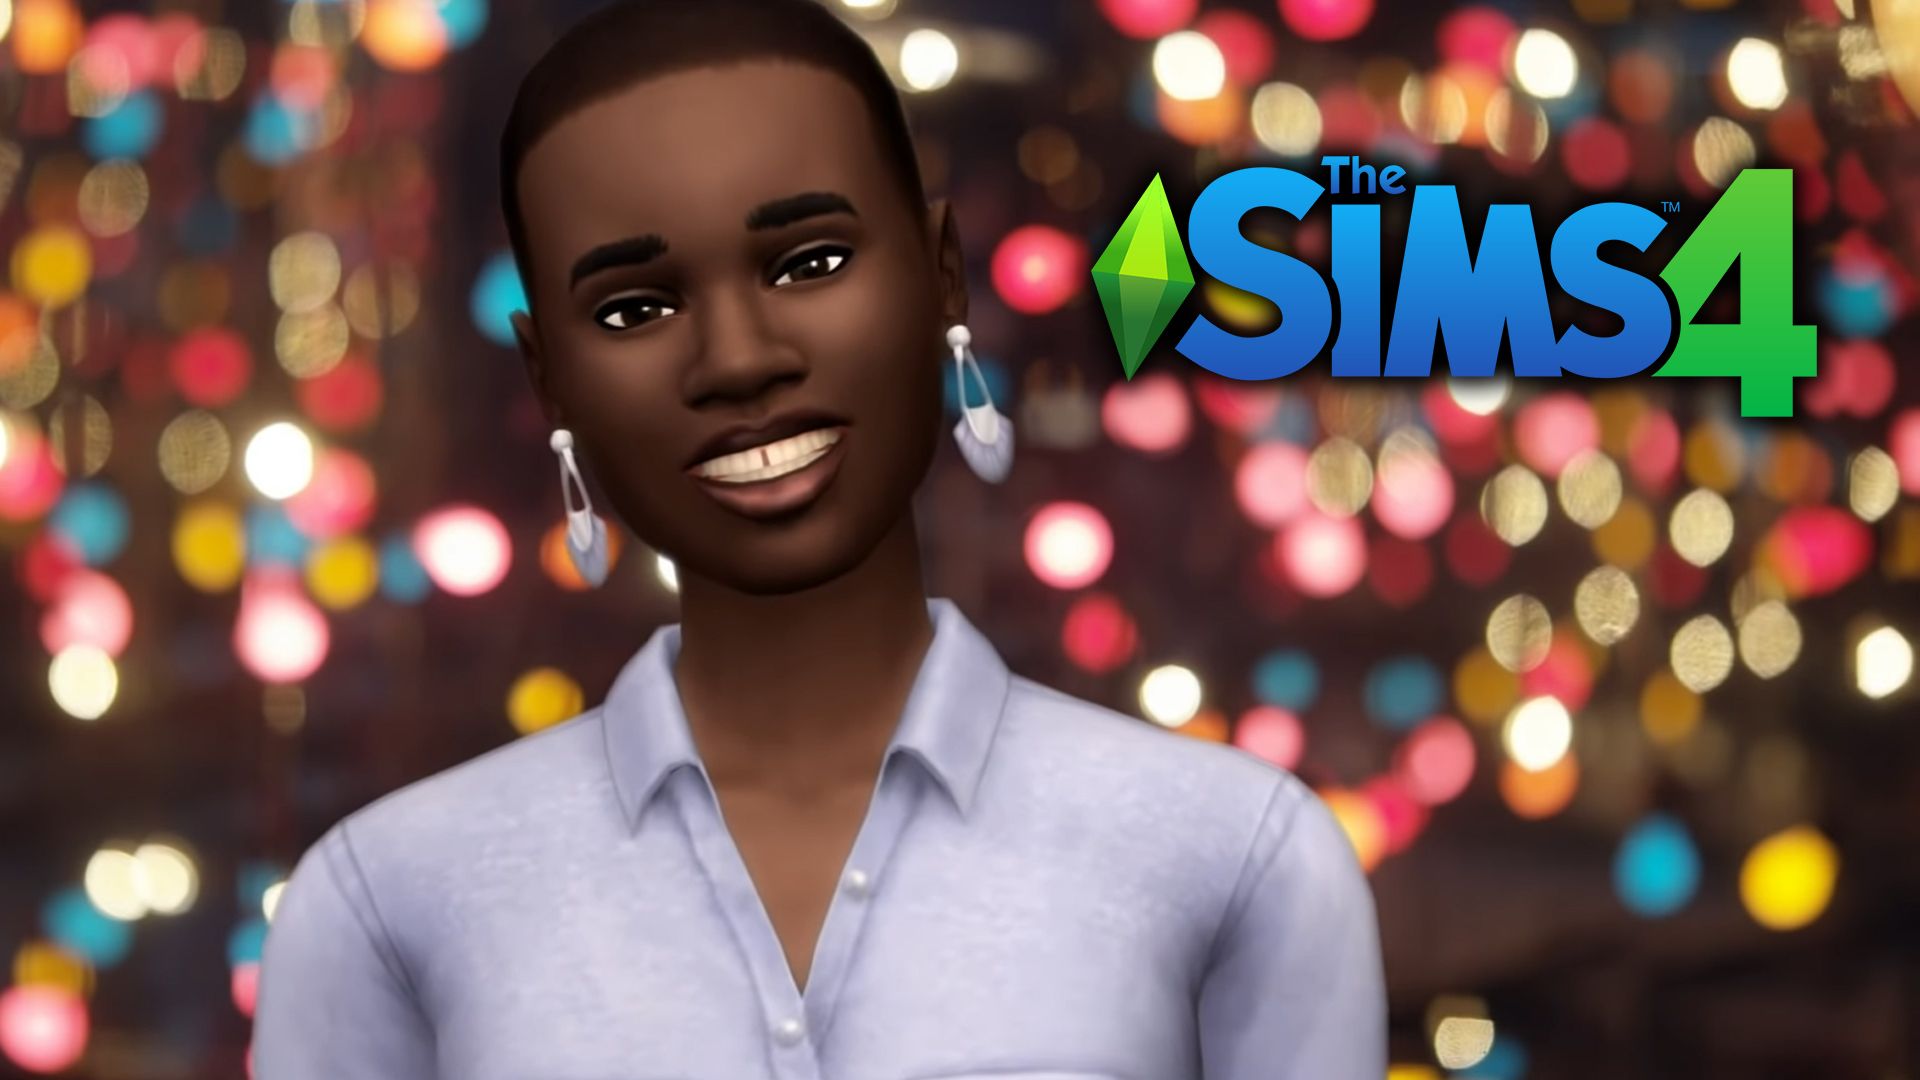 Sims 4 Update Today, May 27/28 Patch Notes, Bunk Beds and Likes